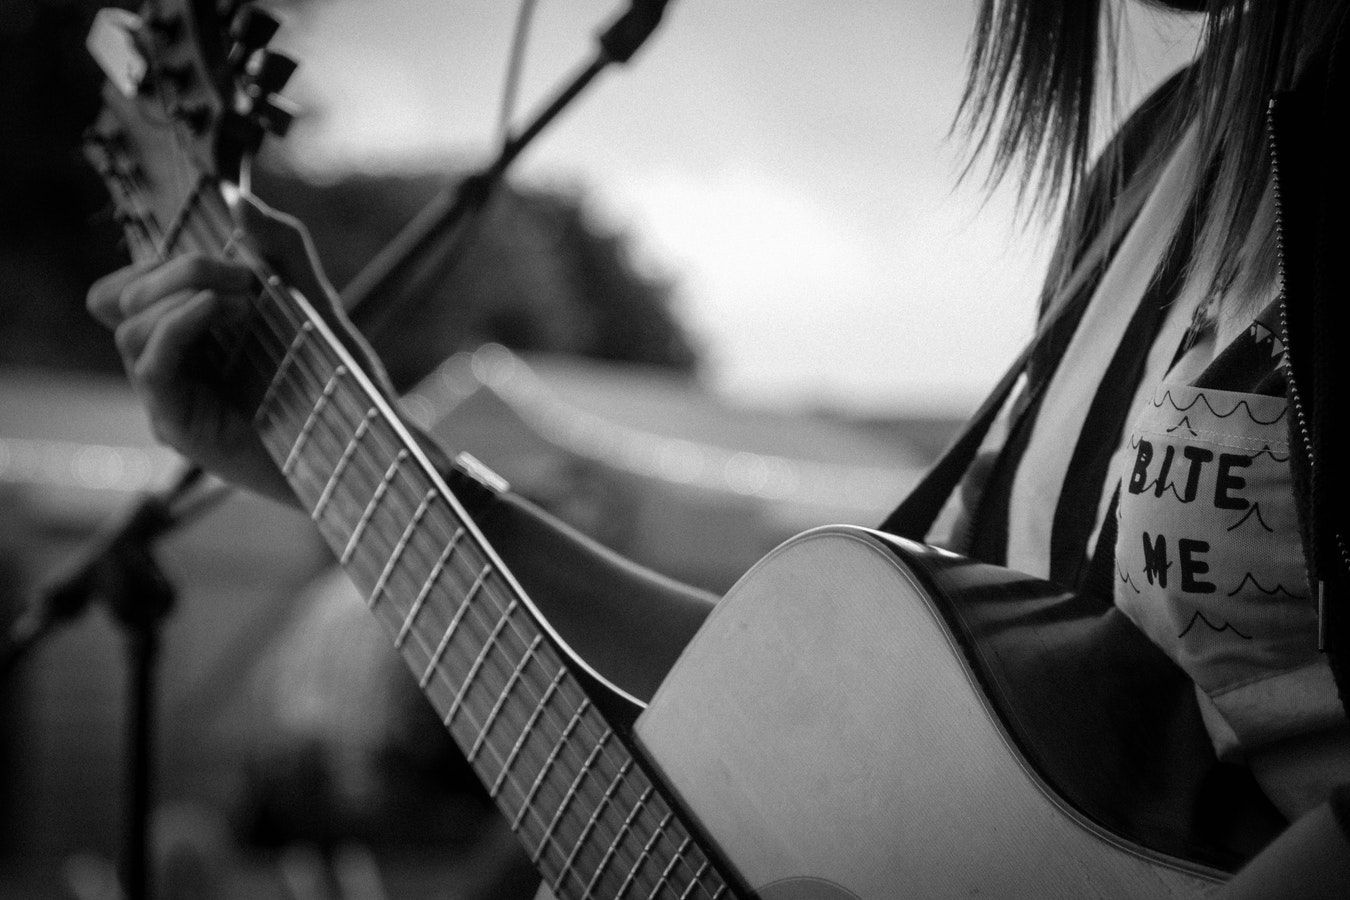 String instrument, Black-and-white, String instrument, Musical instrument, Music, Musician, Acoustic guitar, Monochrome photography, Guitar, Plucked string instruments, 